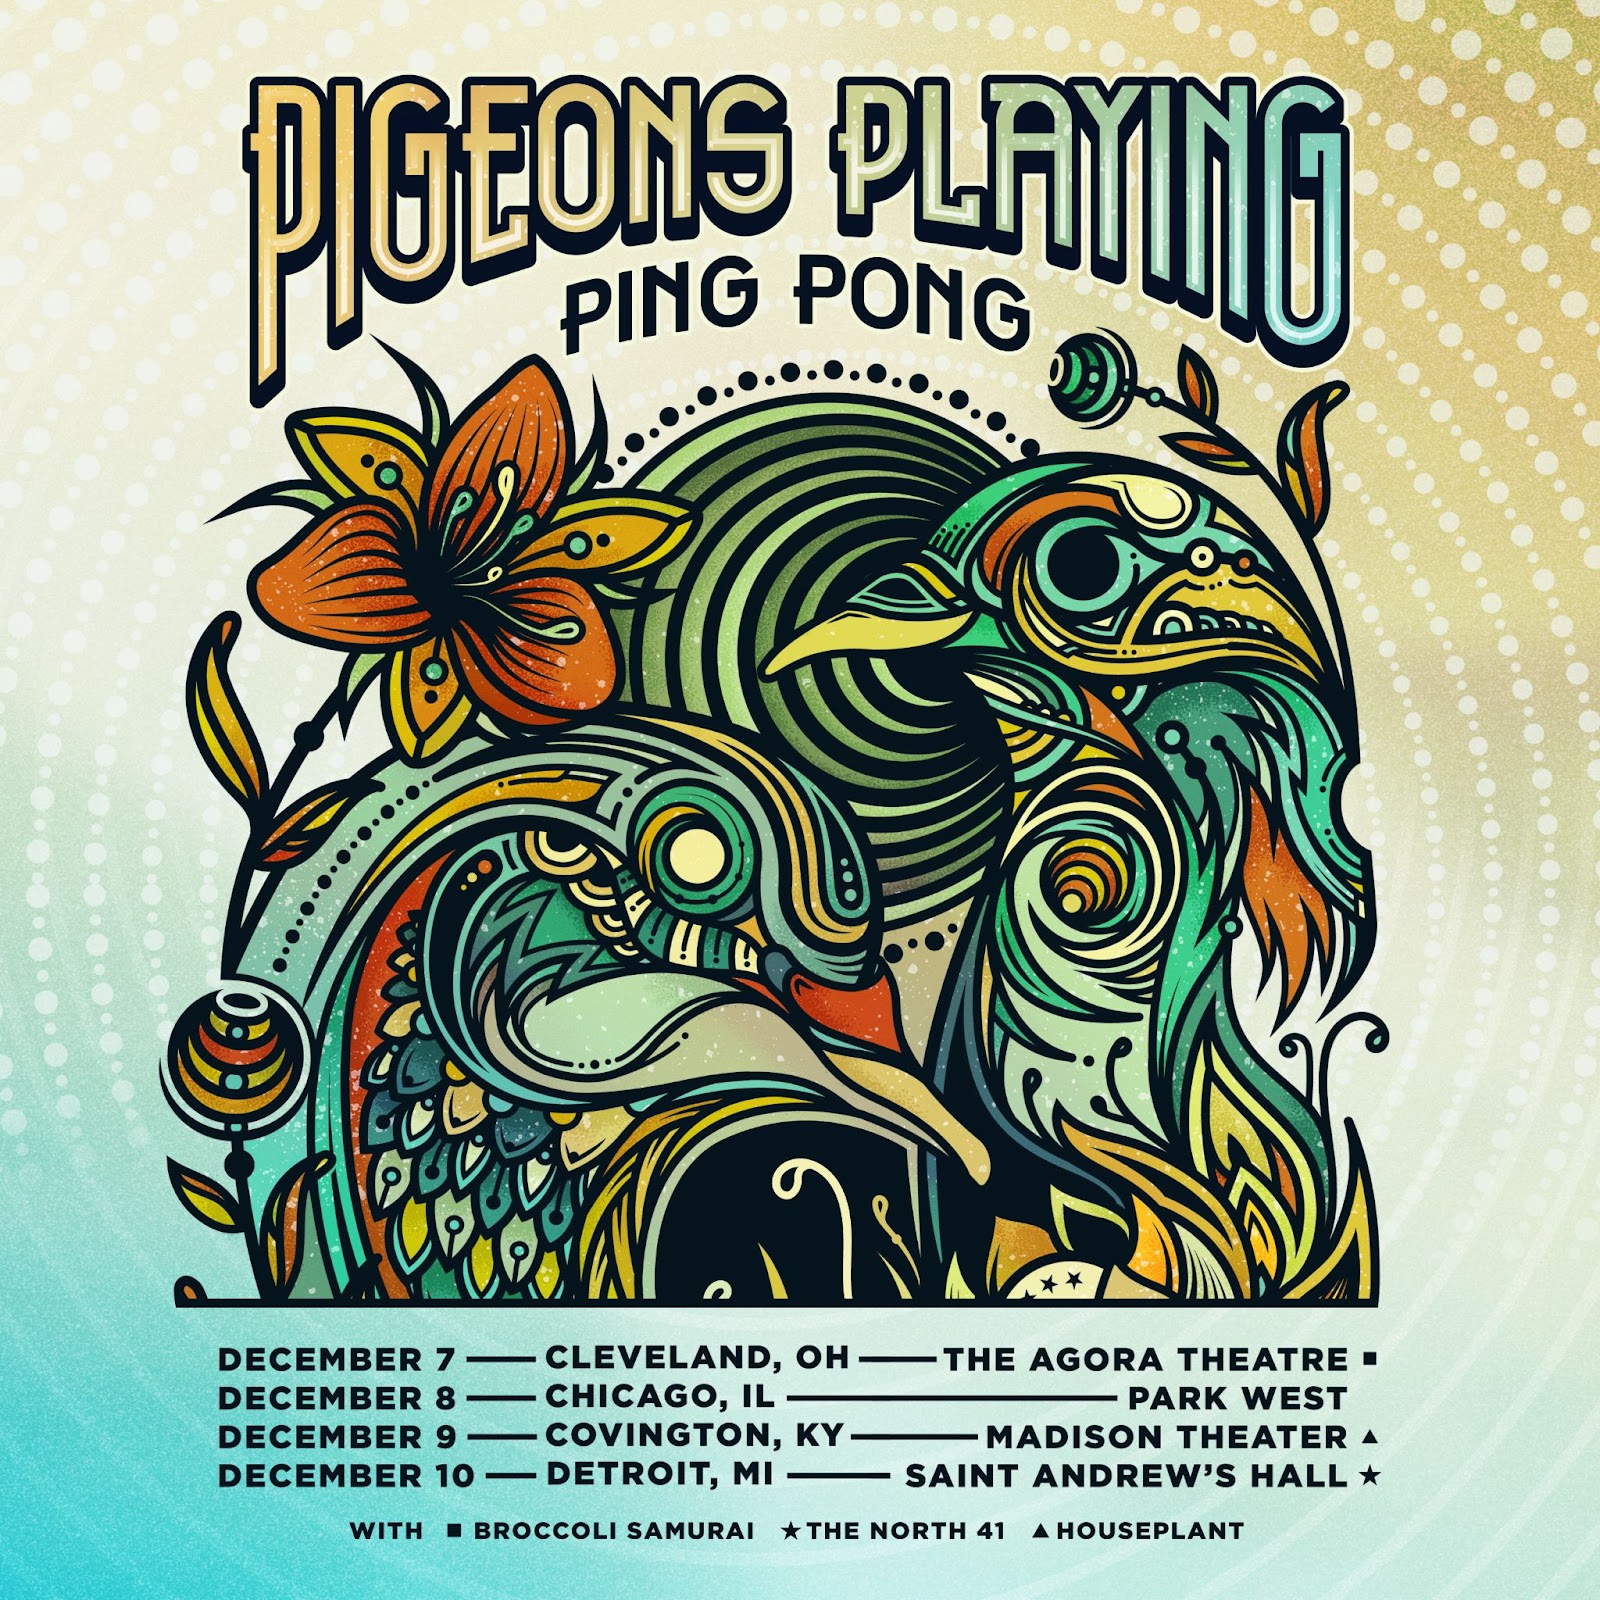 PIGEONS PLAYING PING PONG ANNOUNCES 4-NIGHT MIDWEST RUN IN DECEMBER